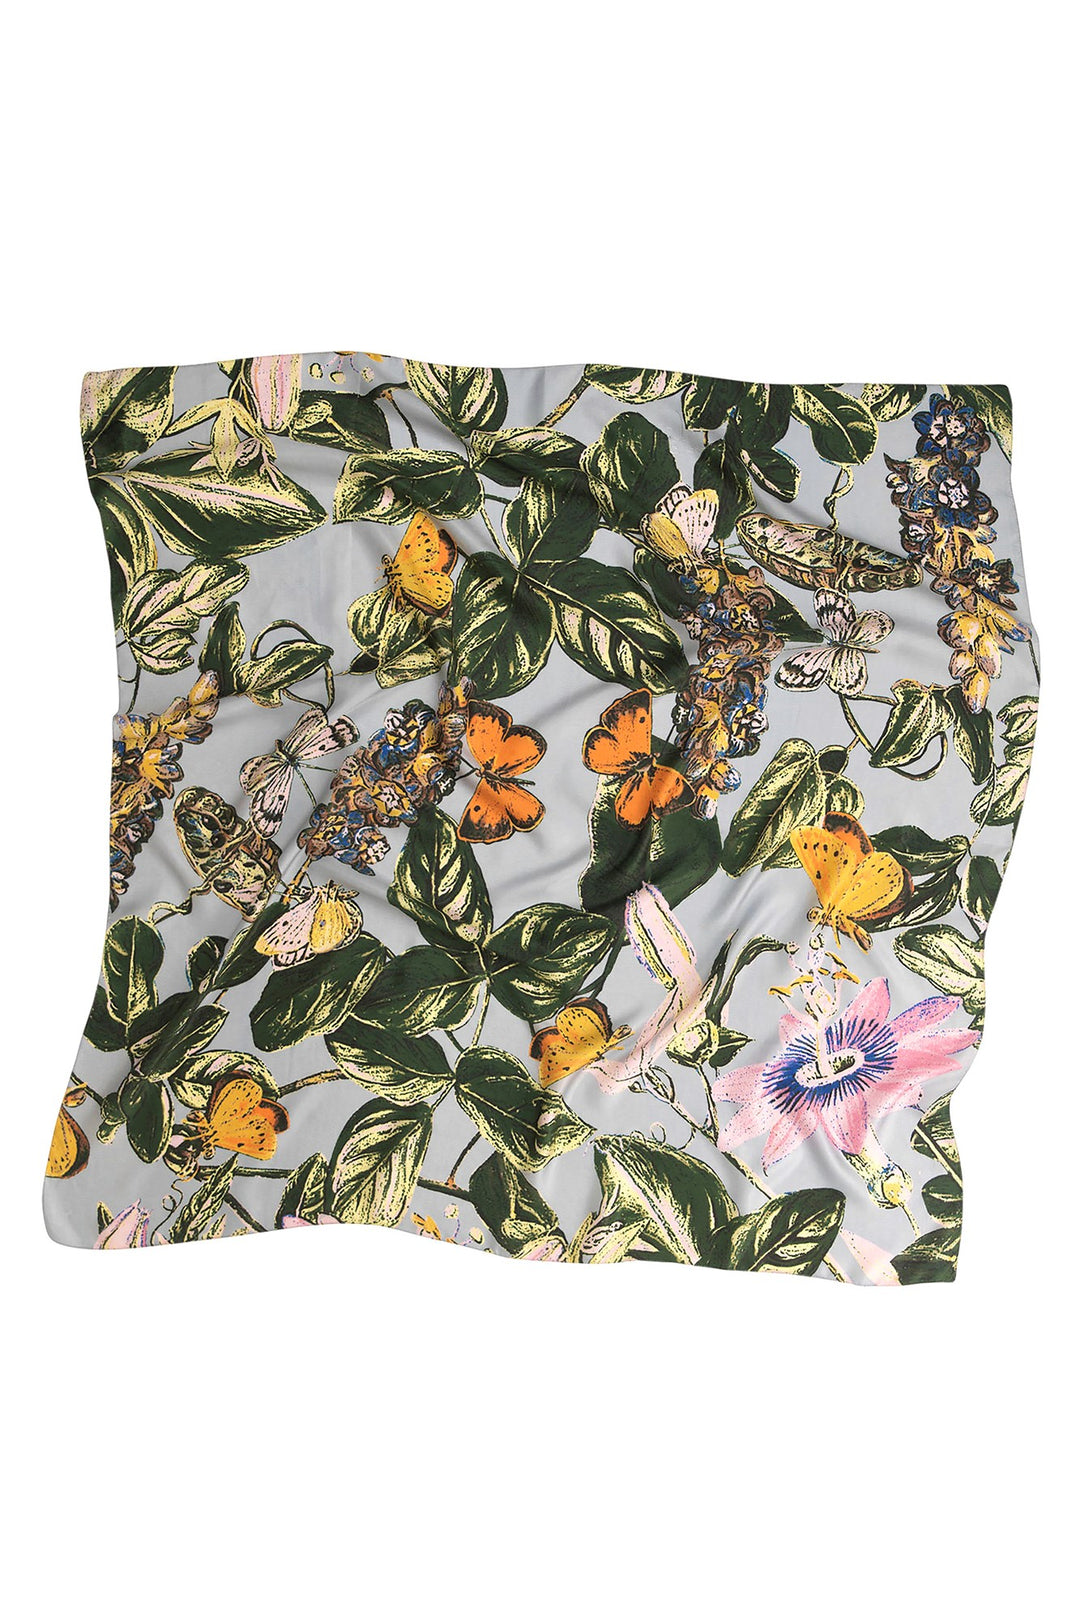 Marianne North Chilli Plant Silk Scarf- 100% silk, 100% hand screen printed and a whole 100cm x 100cm of print, this silk scarf oozes luxury whether you wear it knotted around your neck, as a headscarf or fastened around the handle of your favourite handbag. 